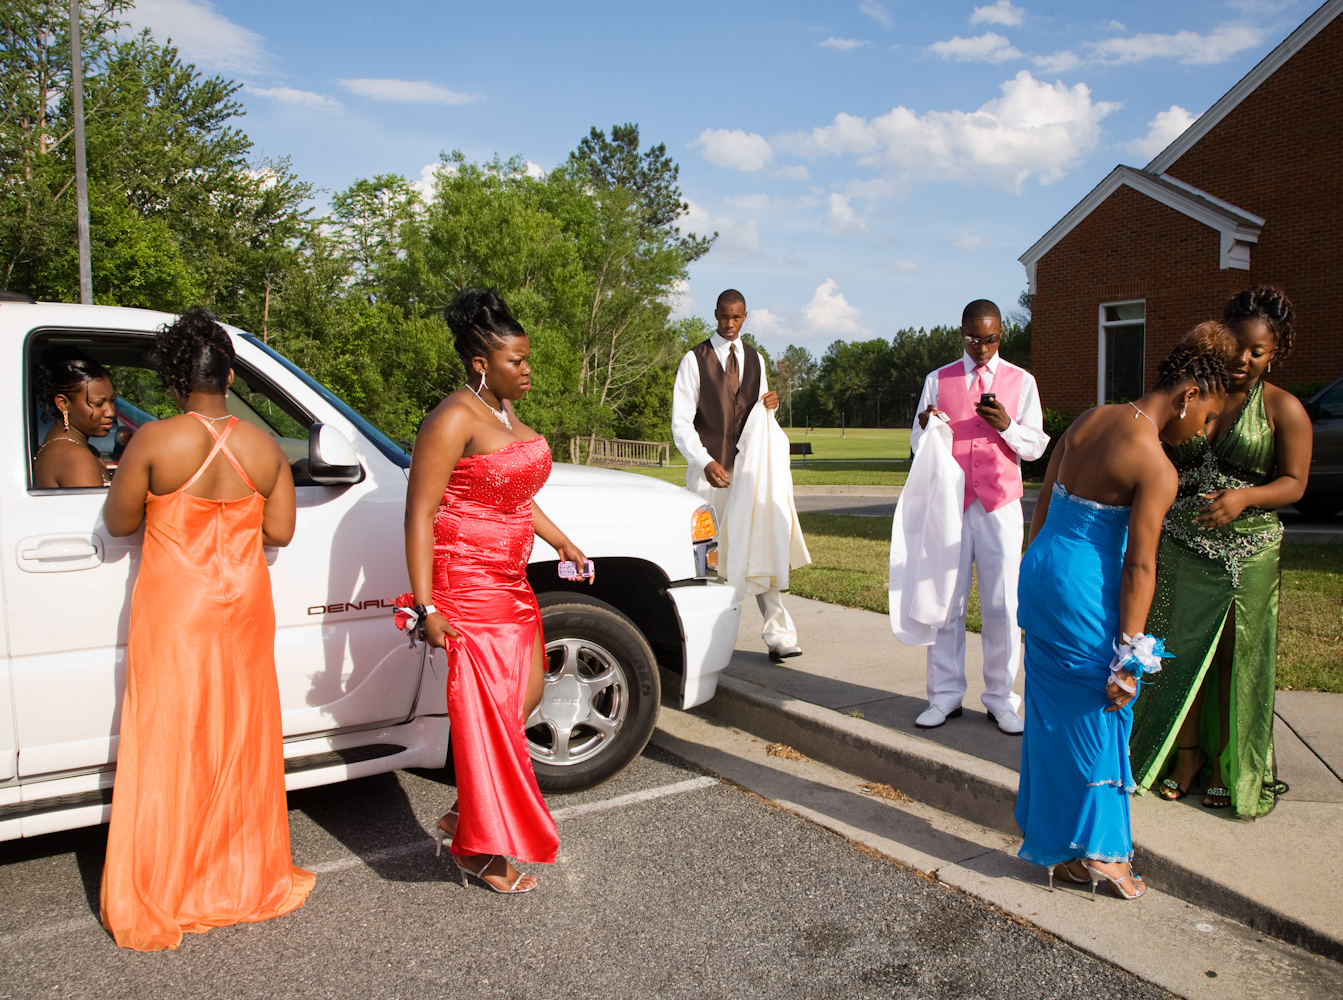 <strong>On average, in 2014, Southern families spent nearly $200 less on prom-related costs than the Northeast and West Coasts, the <a href="http://www.practicalmoneyskills.com/resources/pdfs/Visa_Prom_Survey_2014.pdf" title="2014 Visa Prom Spending Survey" target="_blank">2014 Visa Prom Spending Survey</a> discovered. The American average household spending on the annual high school rite of passage was $978.  Parents were planning to pay for 56% of prom costs, while their teens covered the remaining 44%.  </strong>
                                          
                                          Title: "Parking Lot of the First Integrated Prom, Lyons, Georgia 2010," from the series <a href="http://www.gillianlaub.com/#/Works%20and%20Projects/Southern%20Rites/1/" title="Southern Rites" target="_blank">Southern Rites.</a>
                                          
                                          For more than five years, <a href="http://www.gillianlaub.com/" title="Gillian Laub" target="_blank">Gillian Laub</a> has photographed Mt. Vernon, a town in Georgia where—despite the integration of its schools in 1971—the high school's fall homecoming and spring prom remain racially segregated. In 2009, <a href="http://www.nytimes.com/interactive/2009/05/24/magazine/dividedproms-audioss/" title="New York Times Magazine – A Prom Divided" target="_blank">The New York Times Magazine published some of these images in a photo essay and multimedia piece, "A Prom Divided."</a> It caused national outrage. Now, there is only one homecoming queen and one prom.